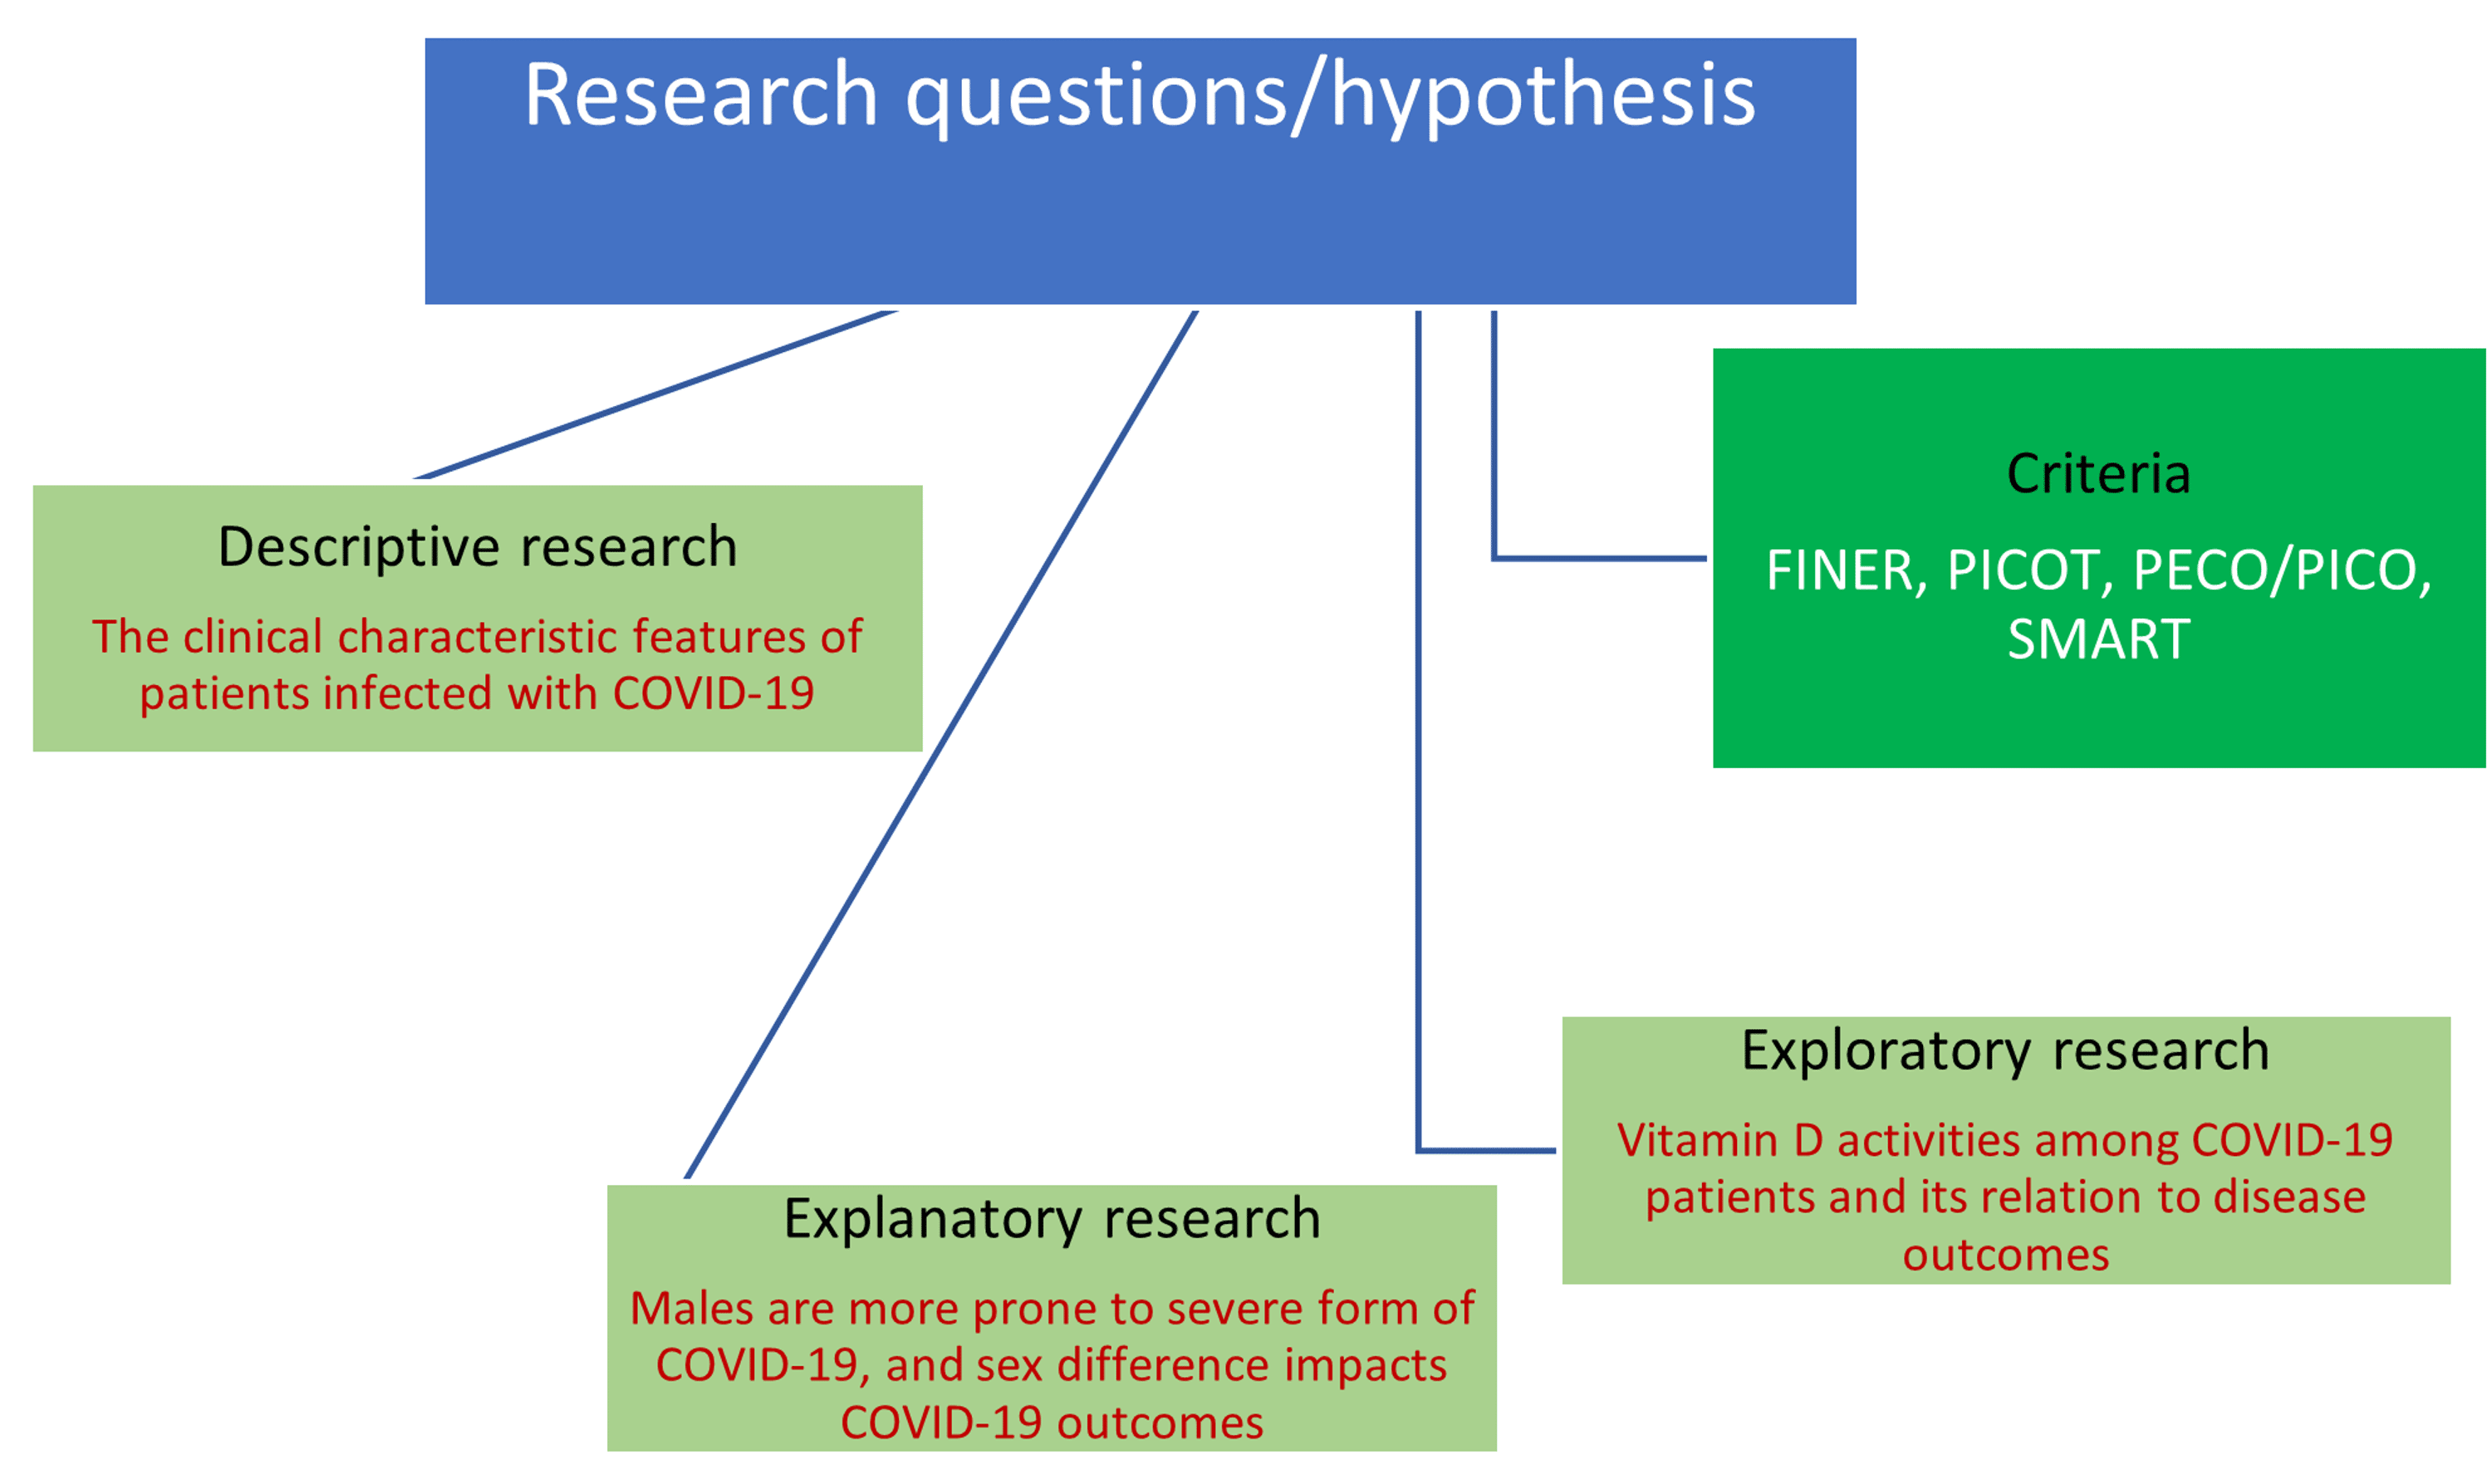 how to frame a research question example